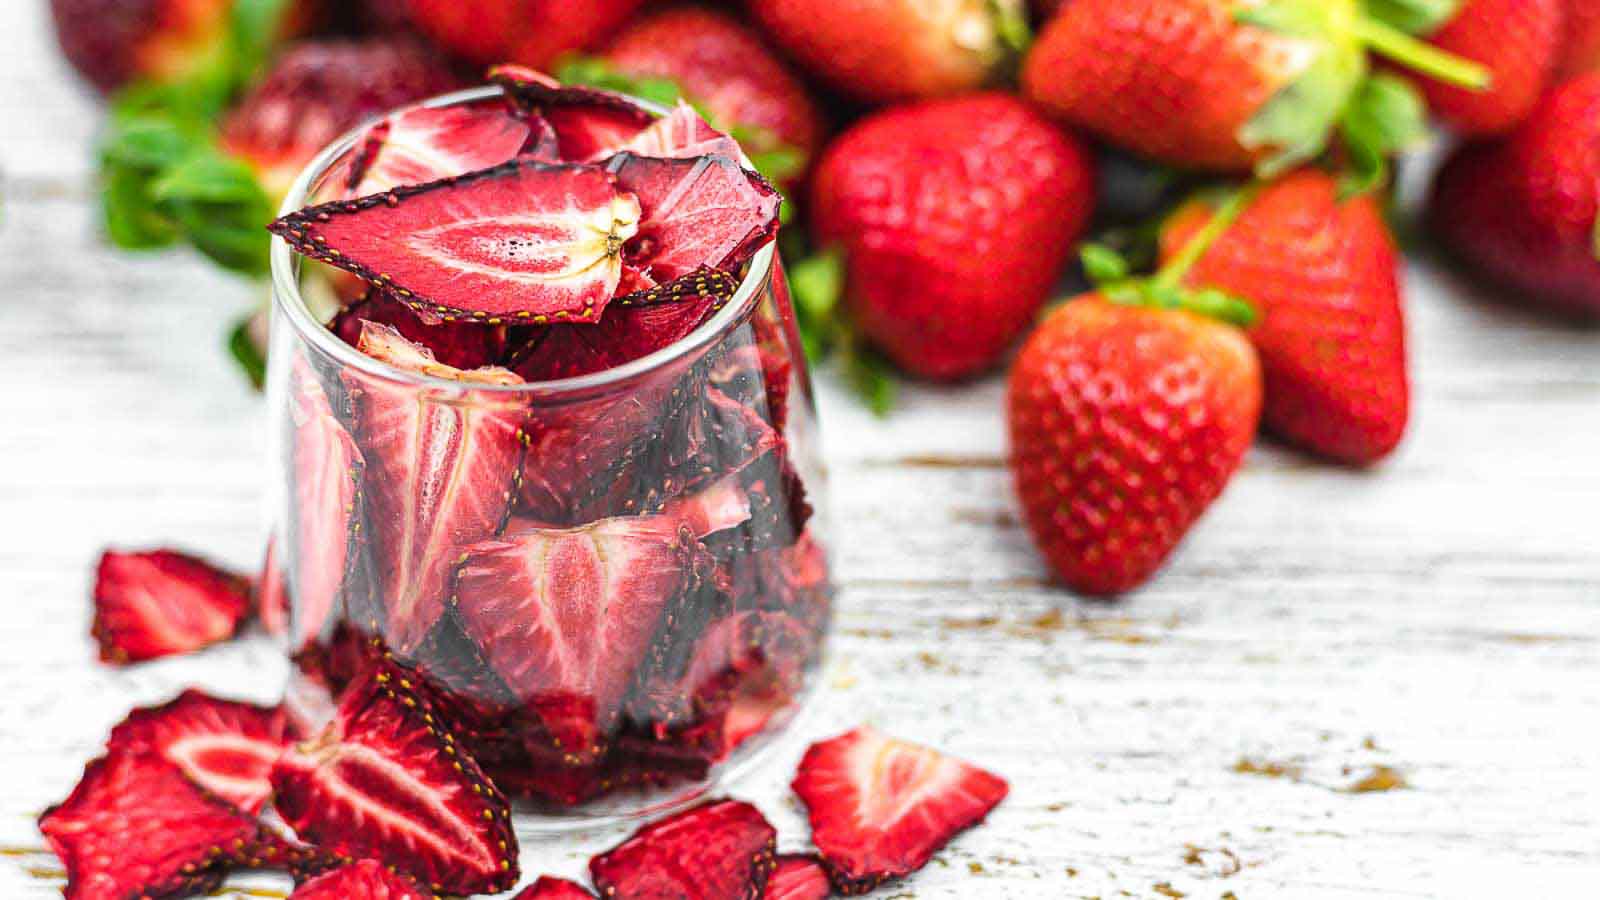 Dehydrated Strawberries in a glass with fresh strawberries in the background.